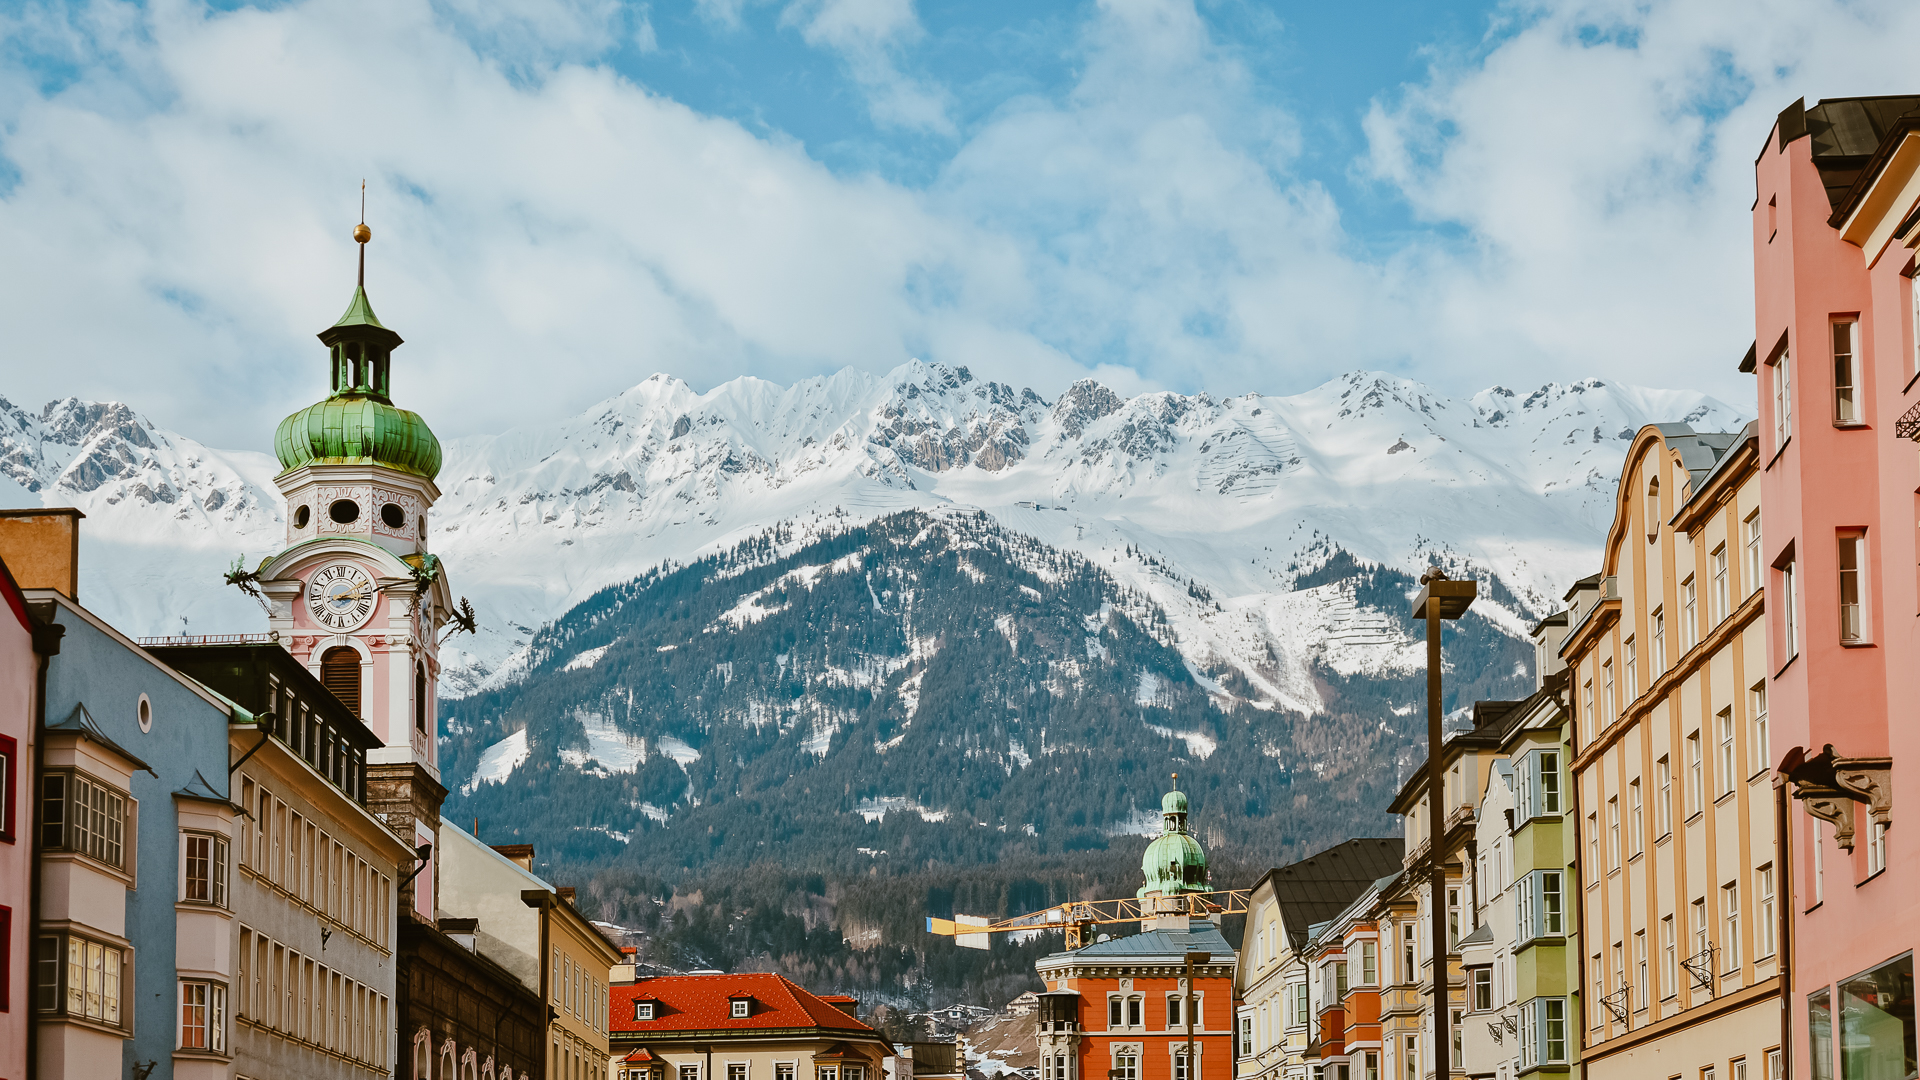 View looking up at a snowy mountain in the background with old buildings of a main square in Innsbruck, Austria in the foreground. One clocktower stands out on the left.